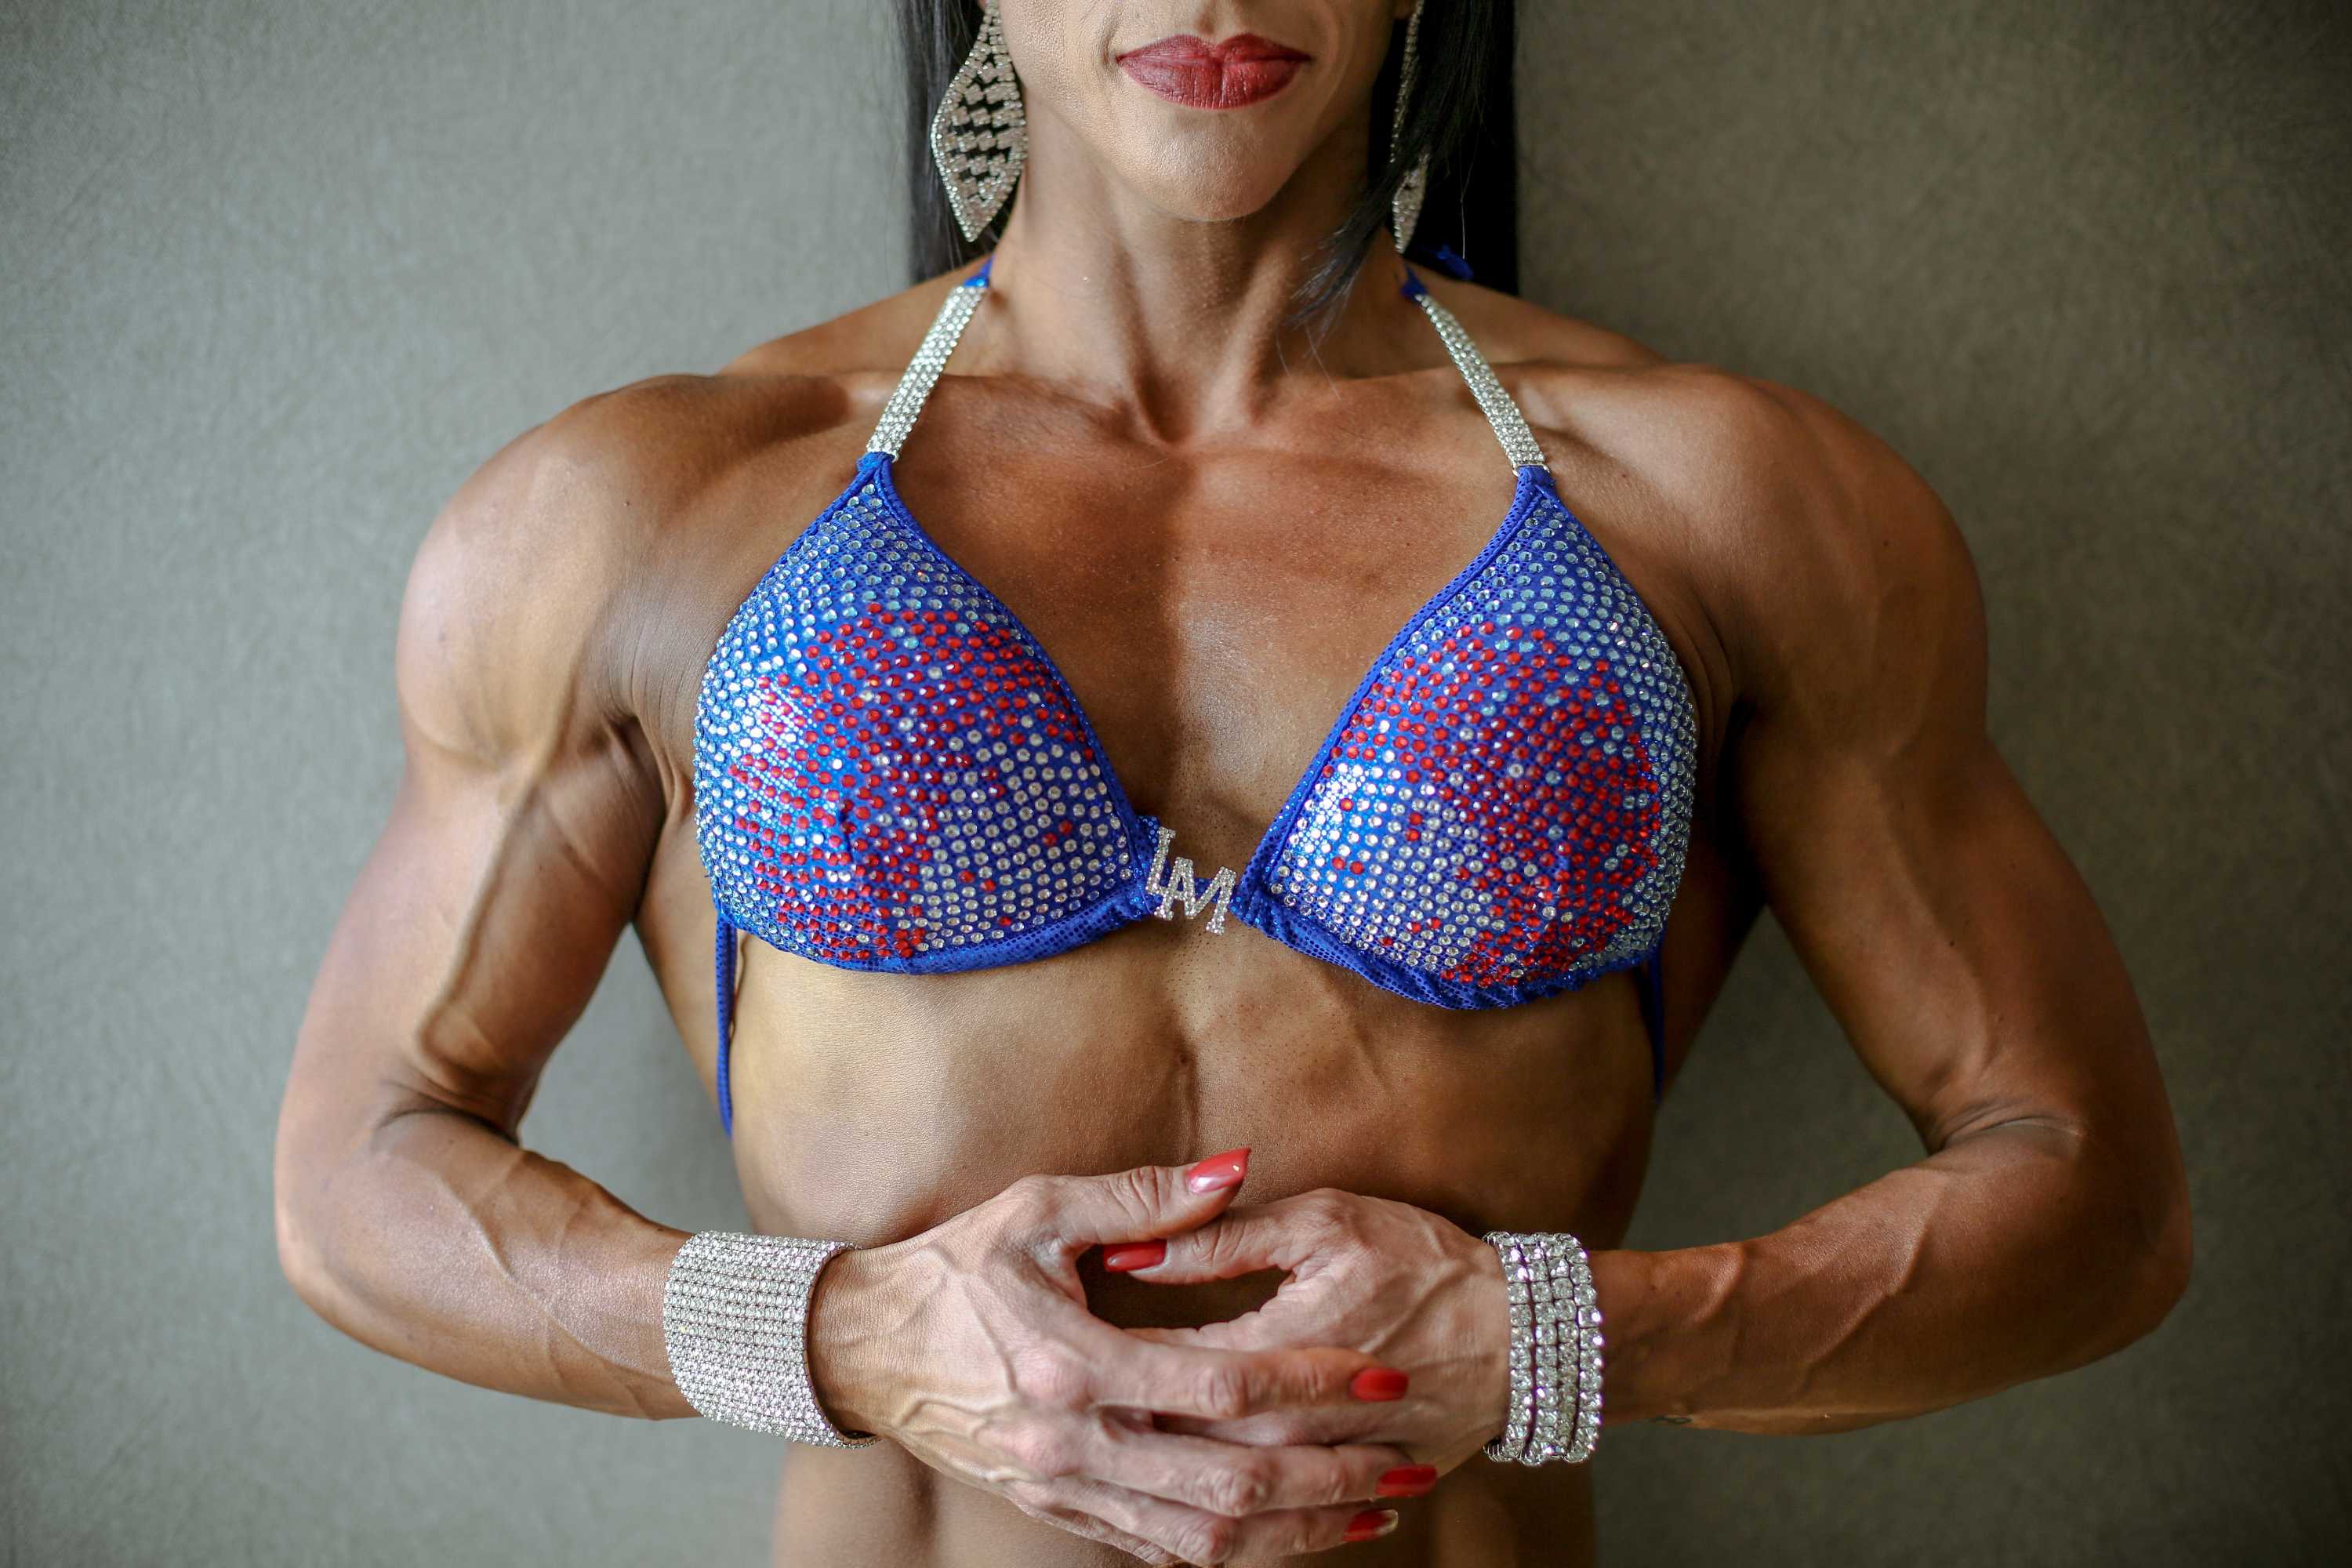 Bodybuilders can go to extremes to compete on stage — and its not always healthy photo